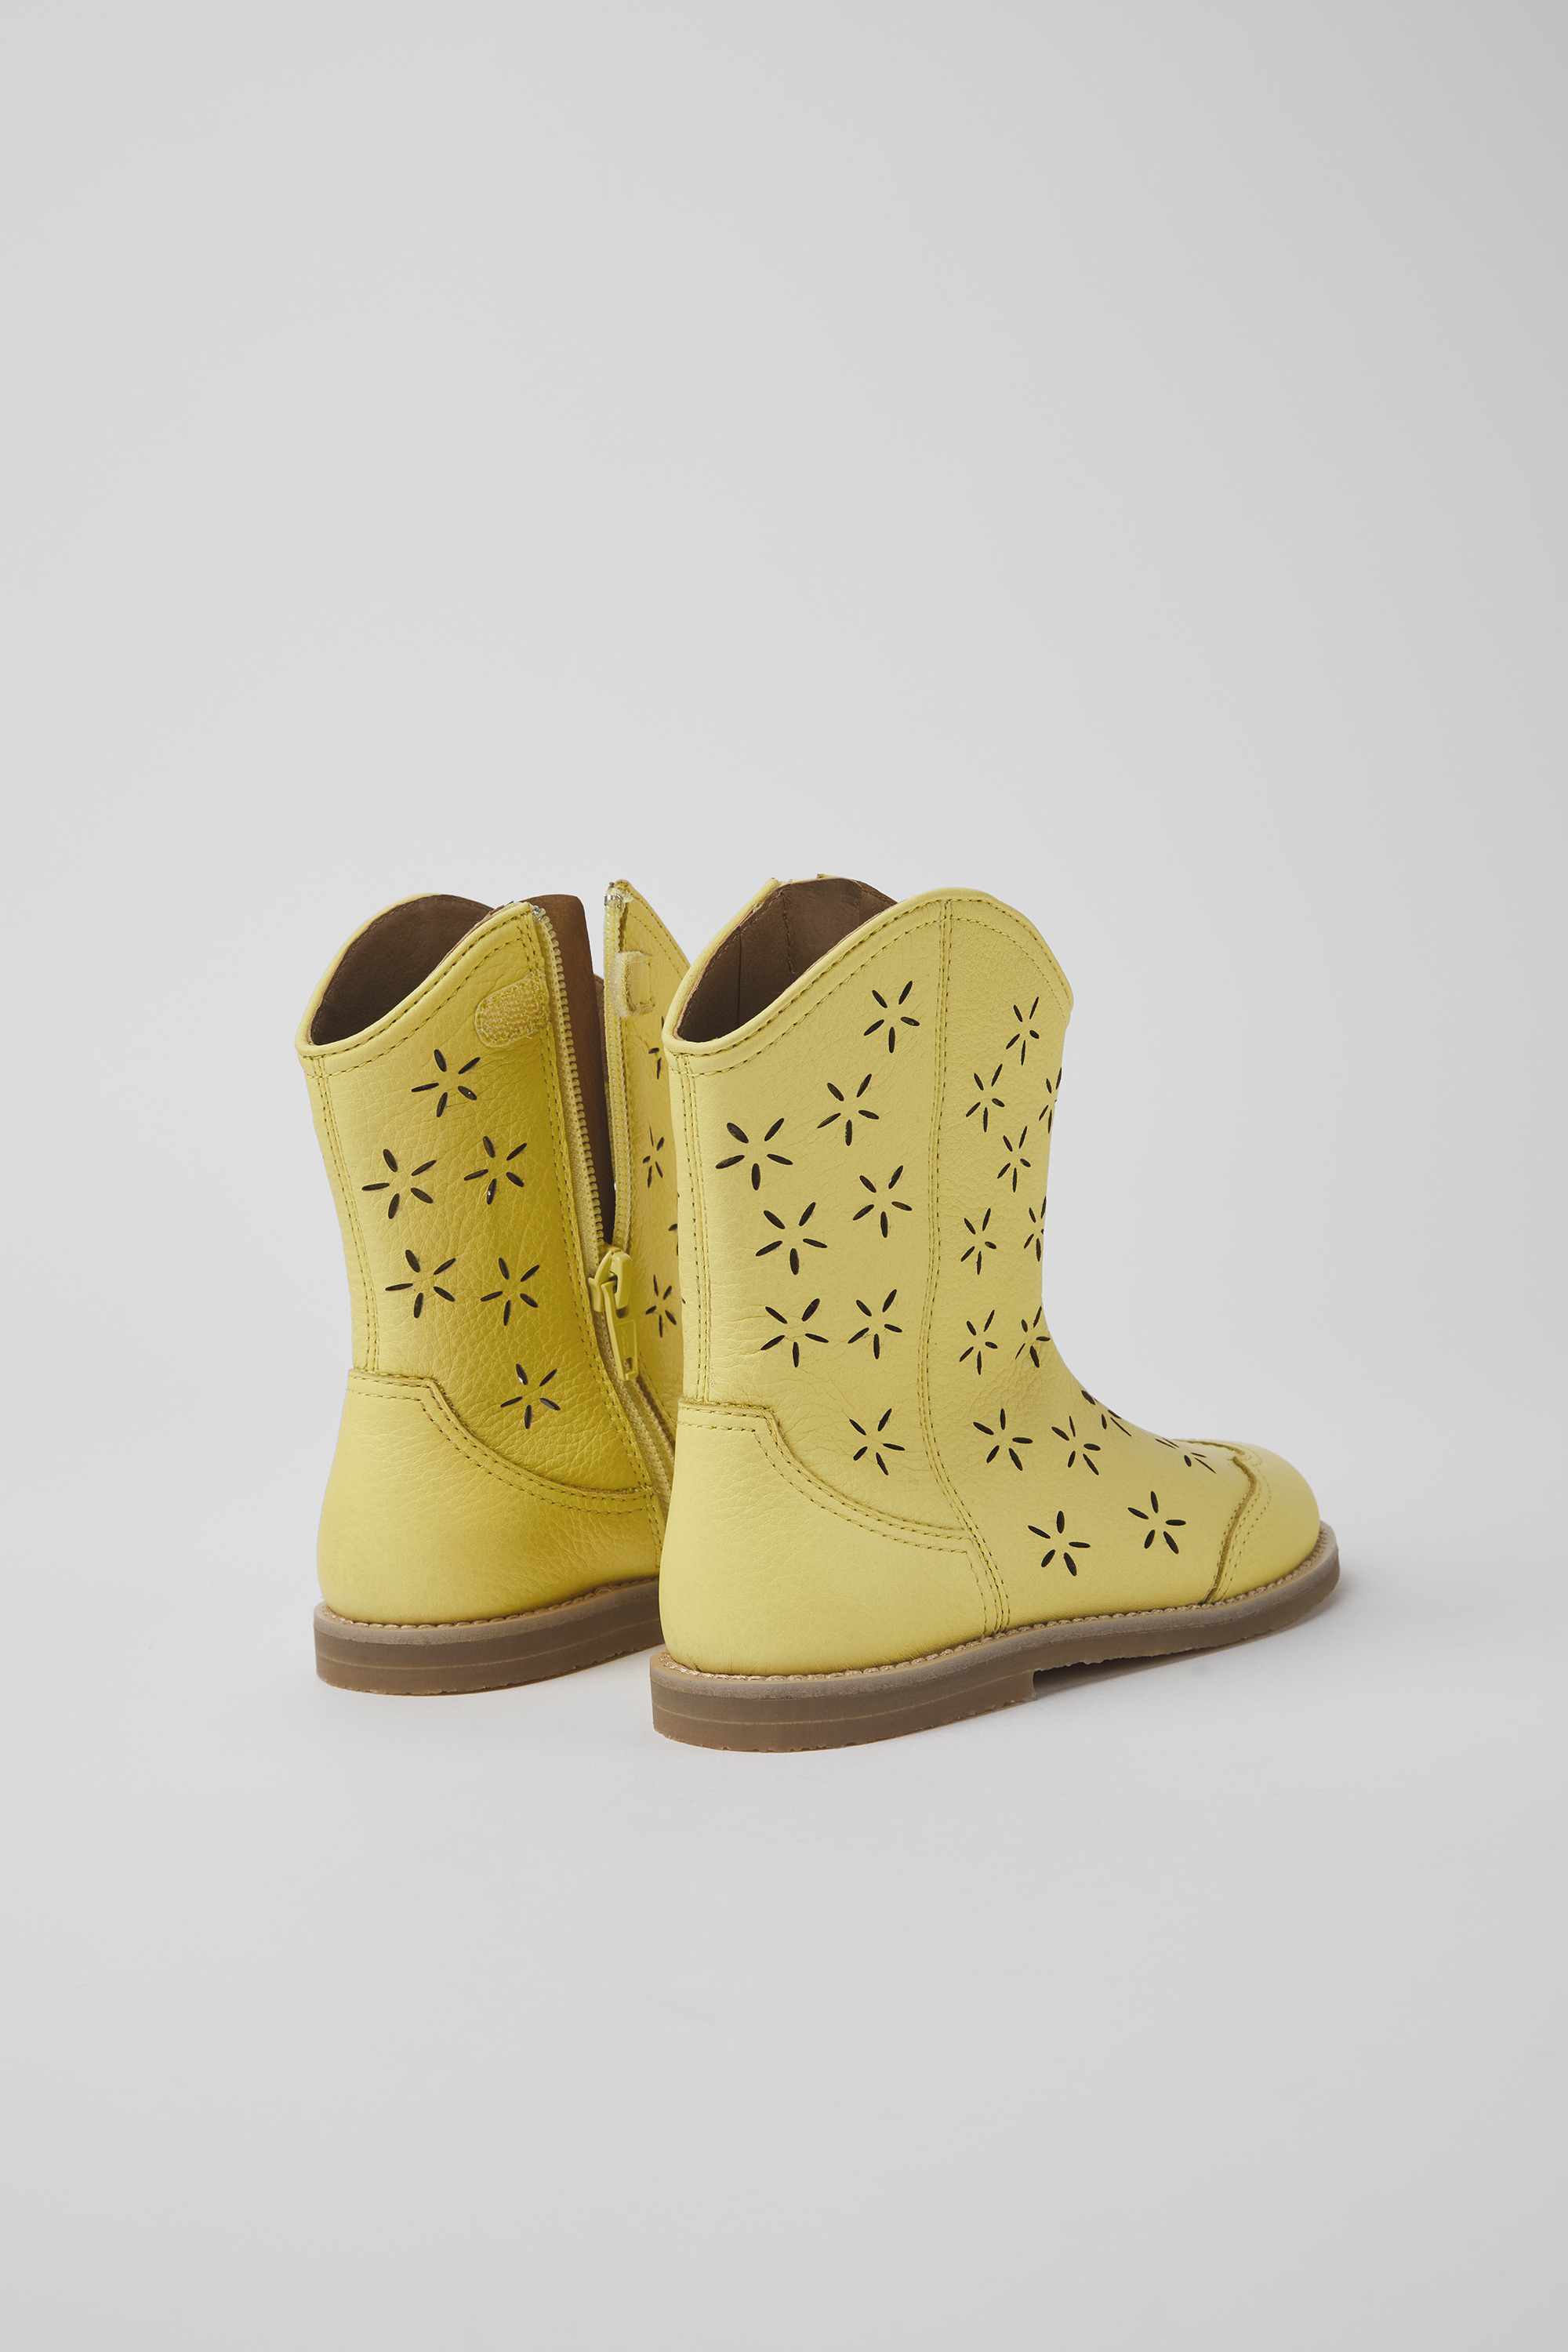 Green Boots for Kids - Autumn/Winter collection - Camper USA